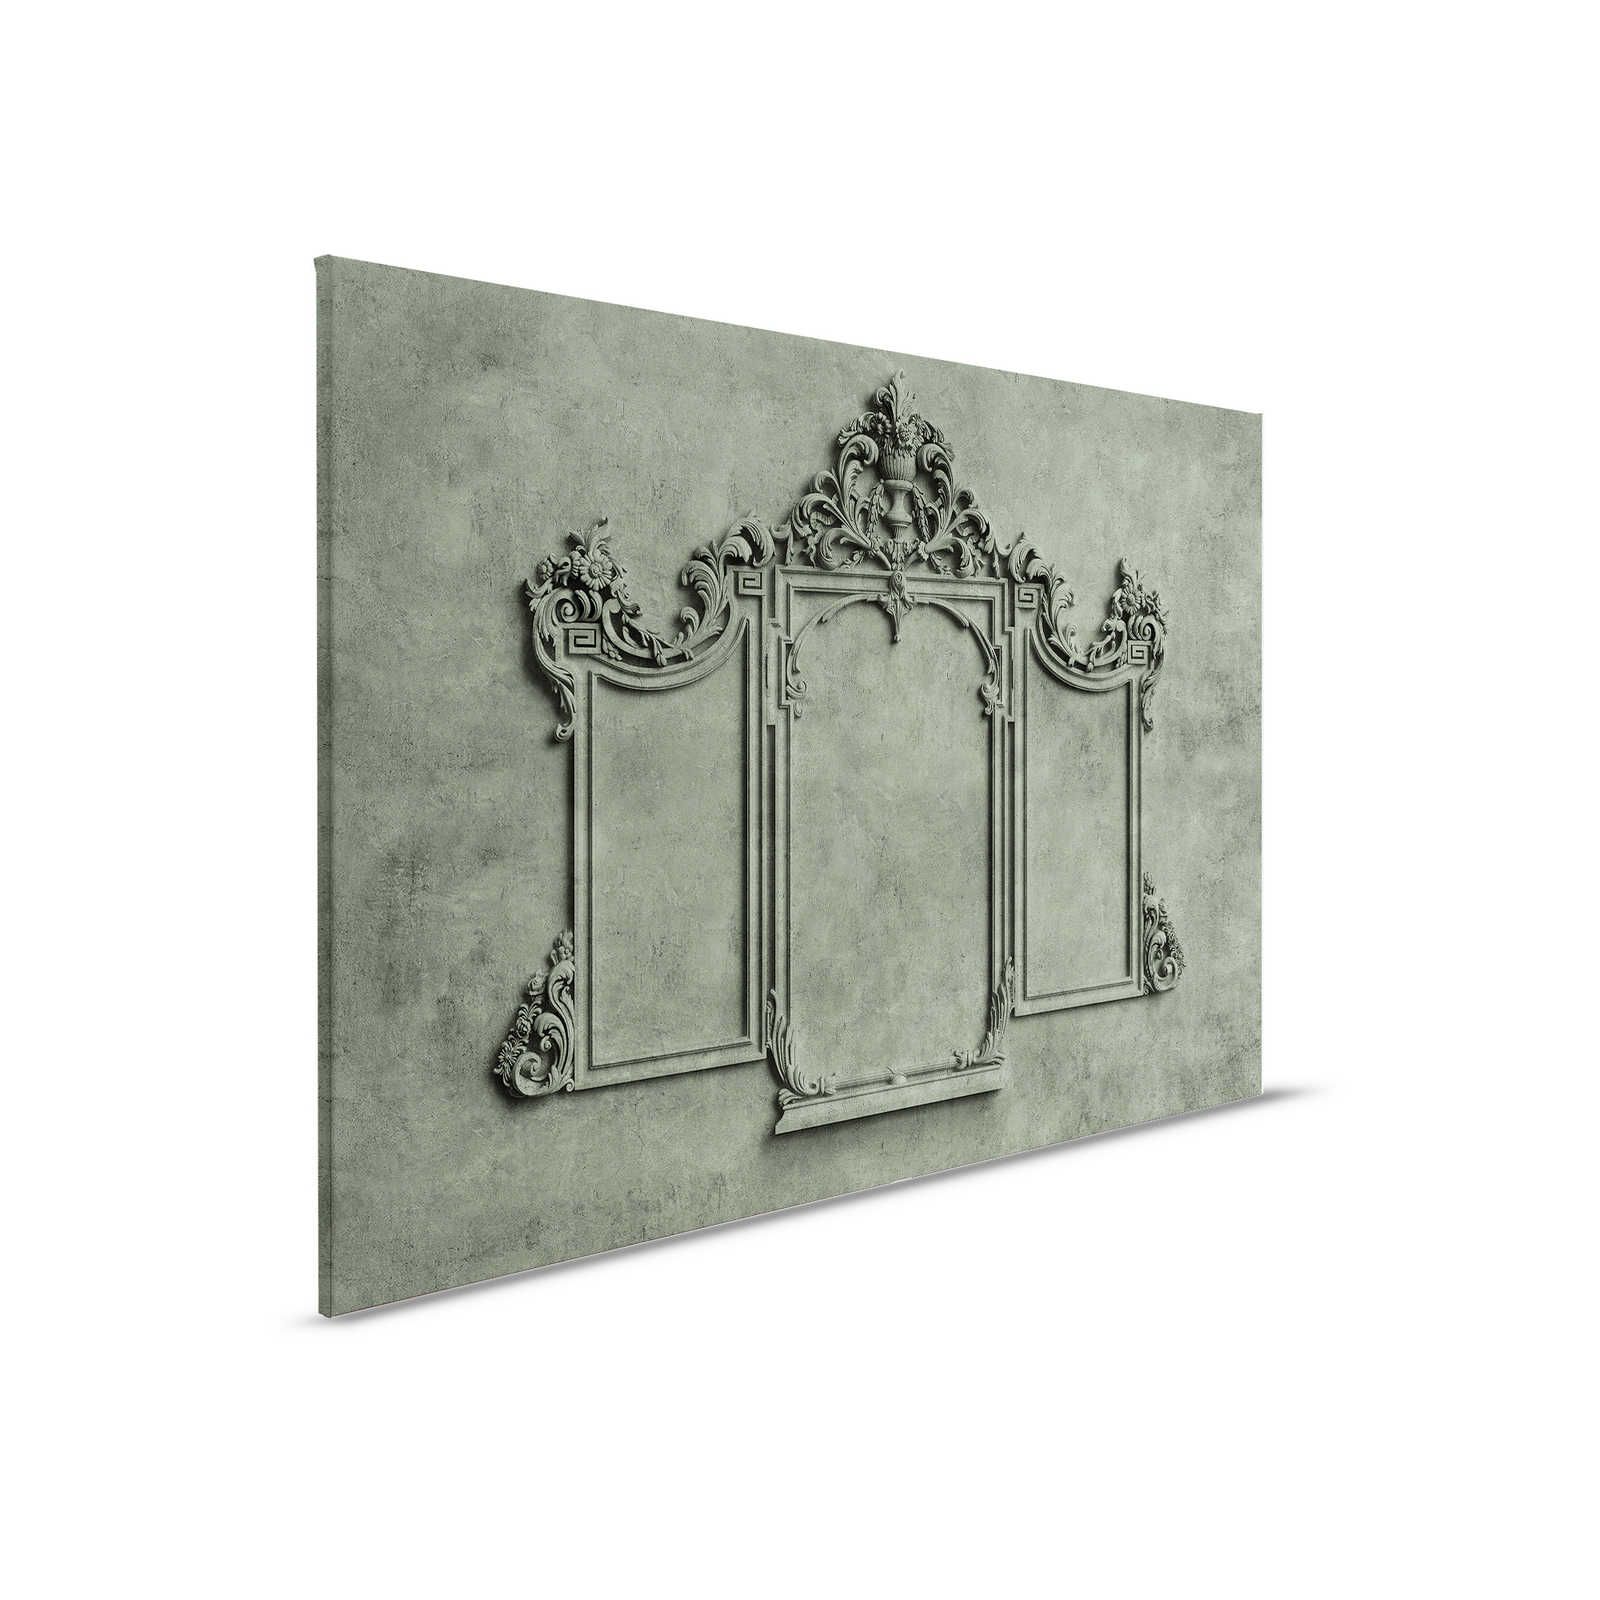 Lyon 2 - Canvas painting 3D stucco frame & plaster look in green - 0.90 m x 0.60 m
